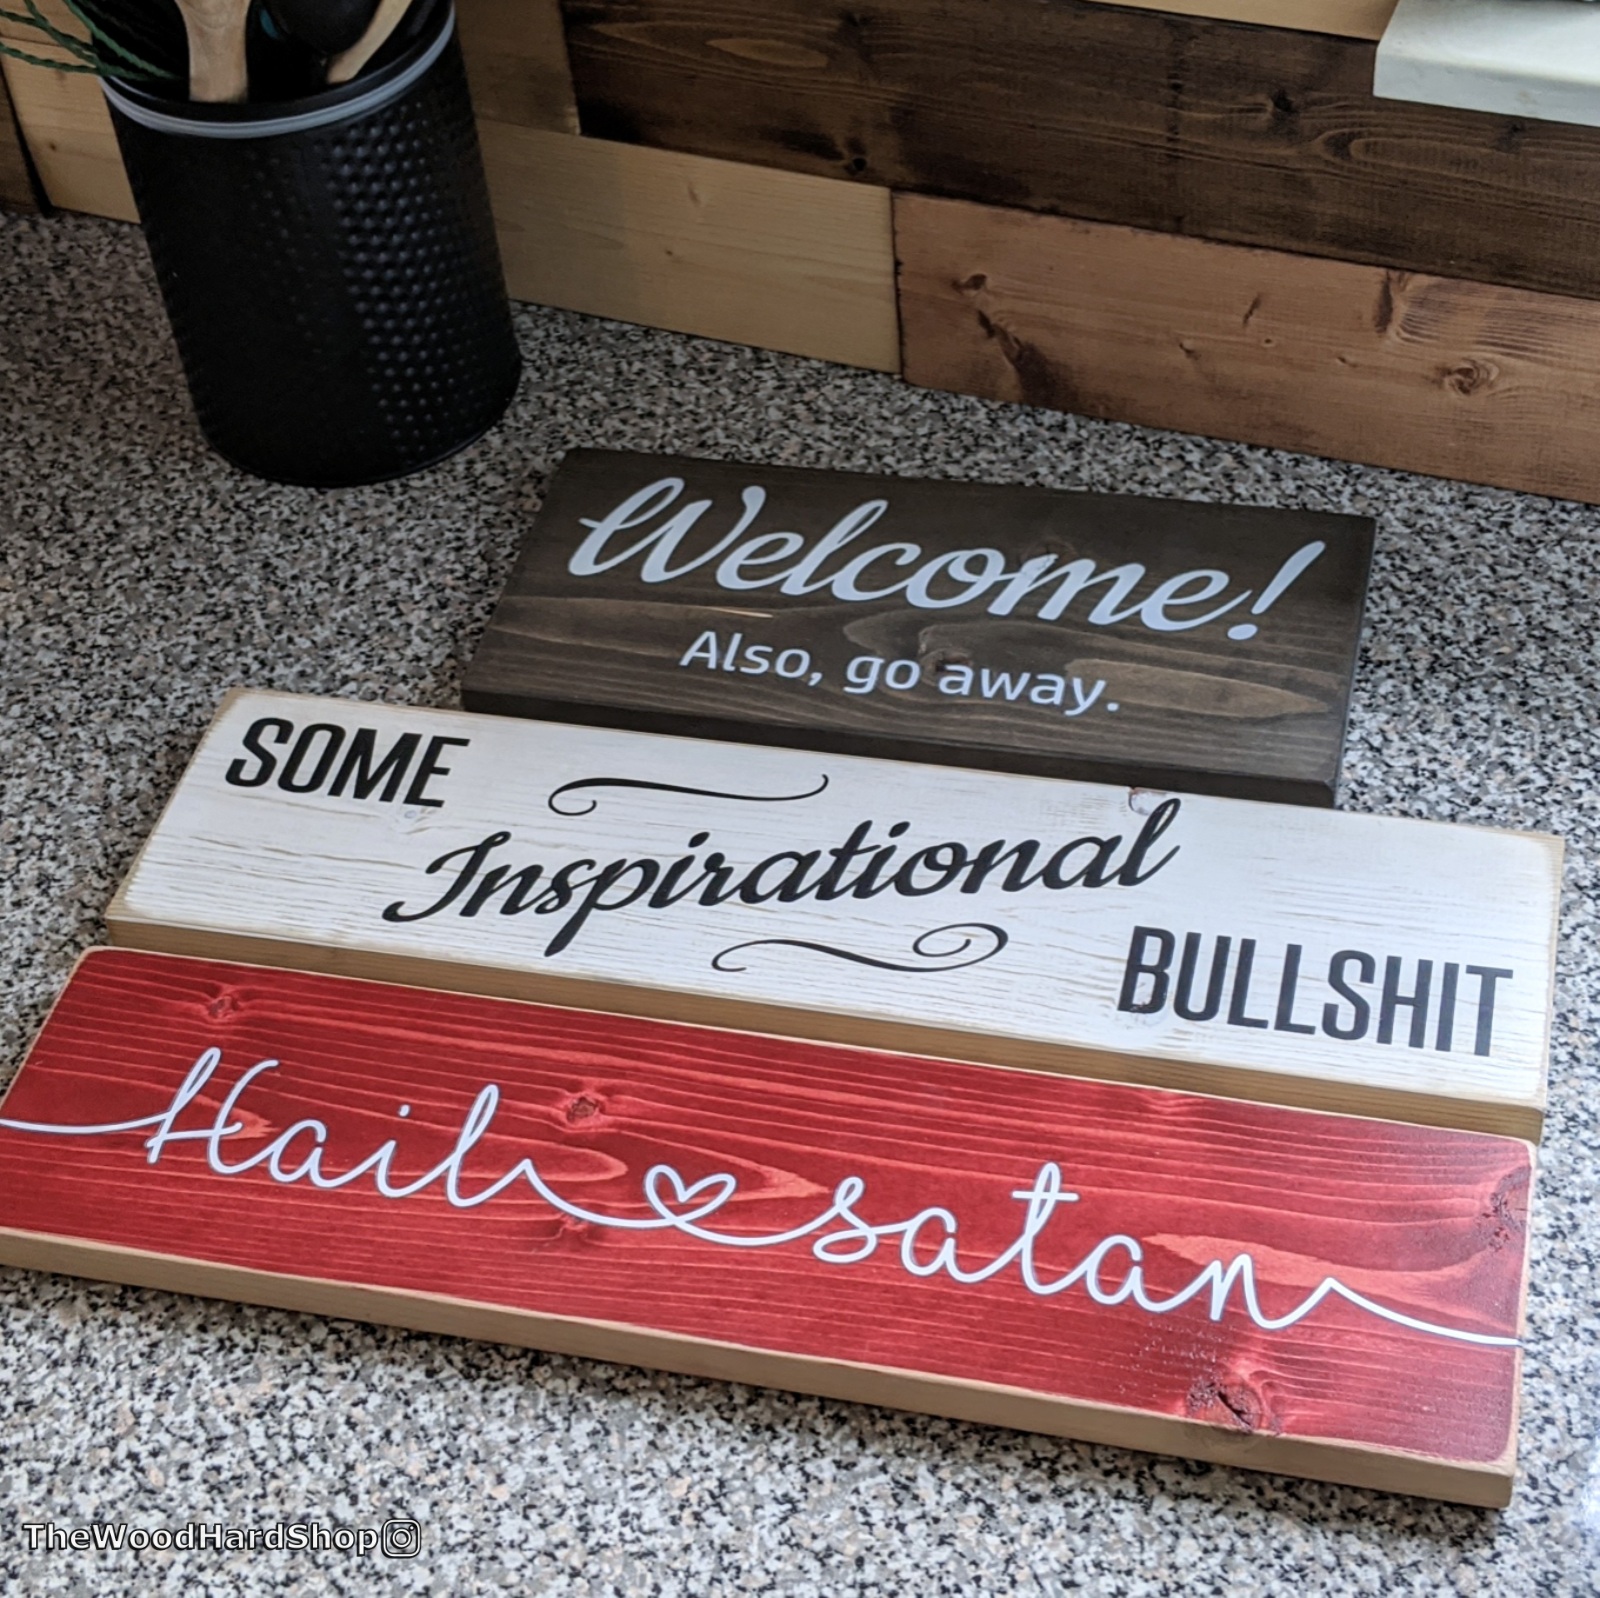 Some "Inspirational" Home Décor I Made. Just For Fun